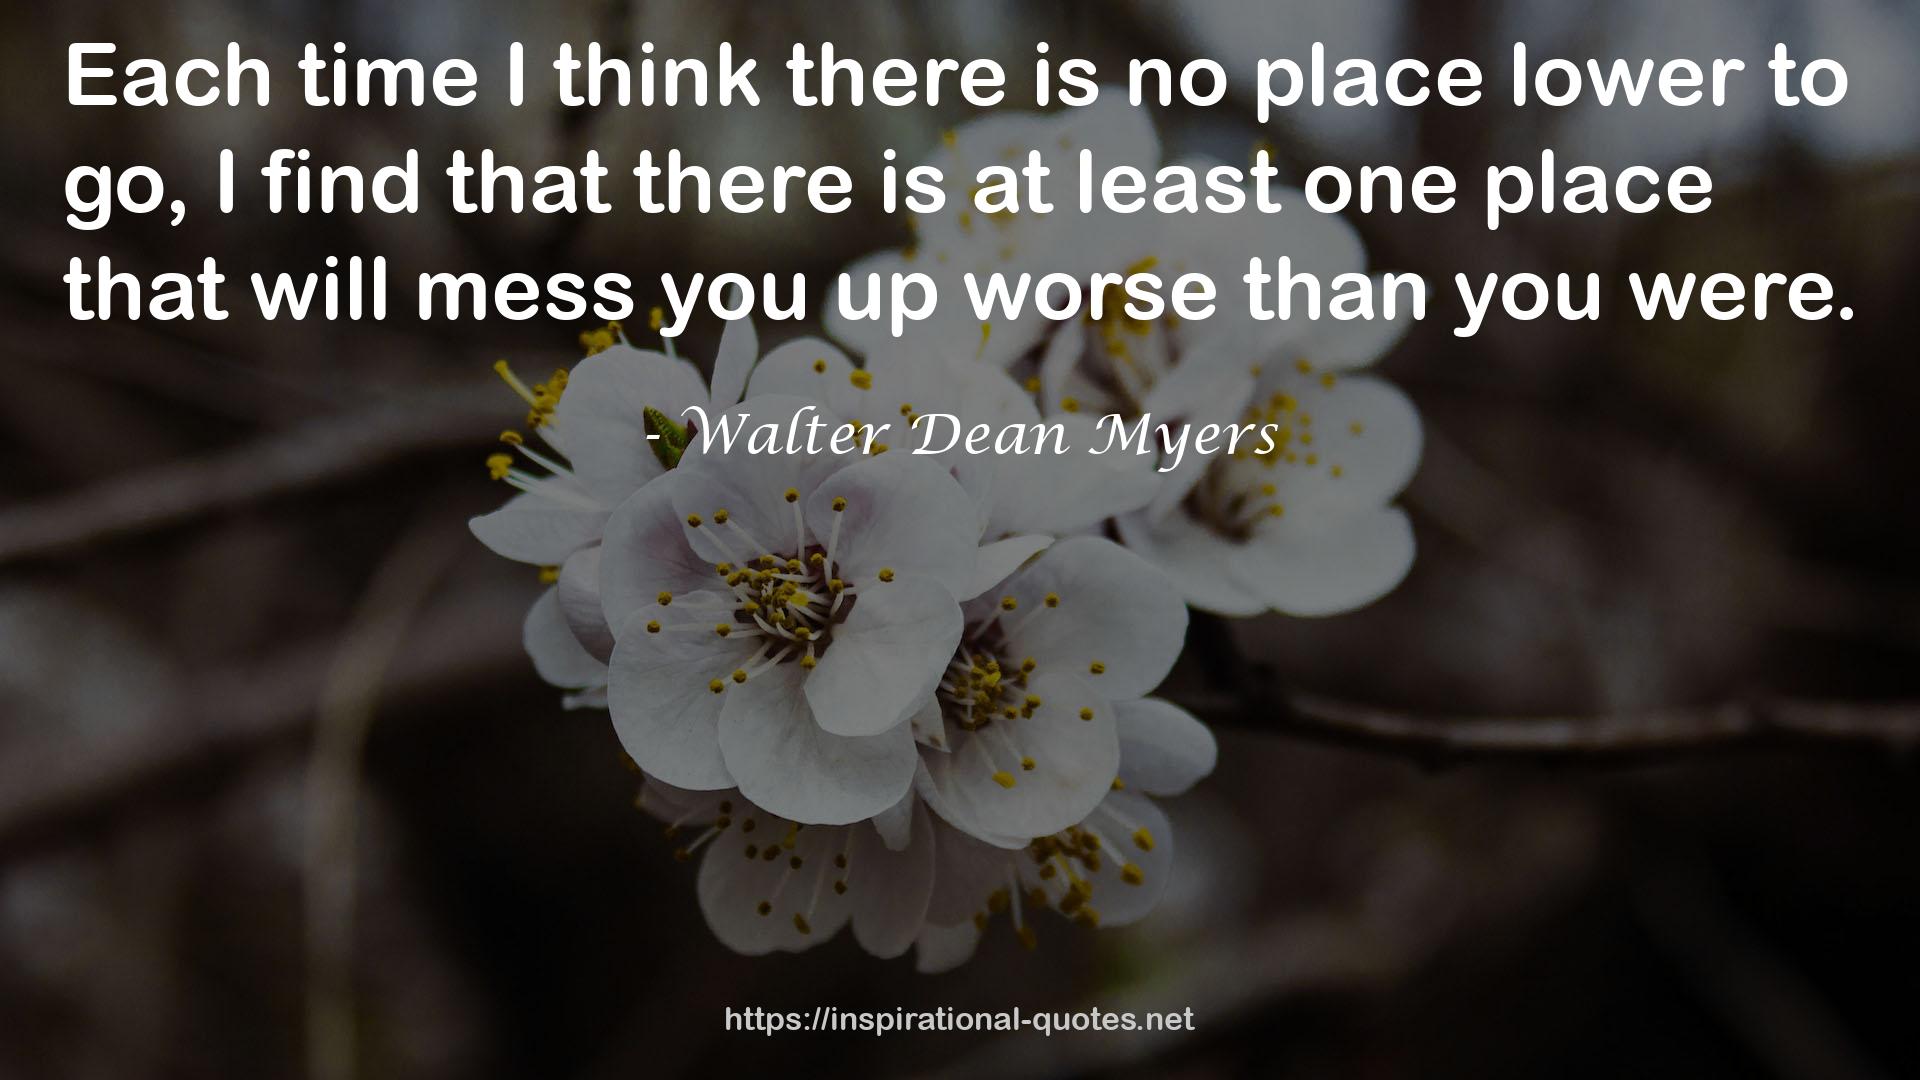 Walter Dean Myers QUOTES